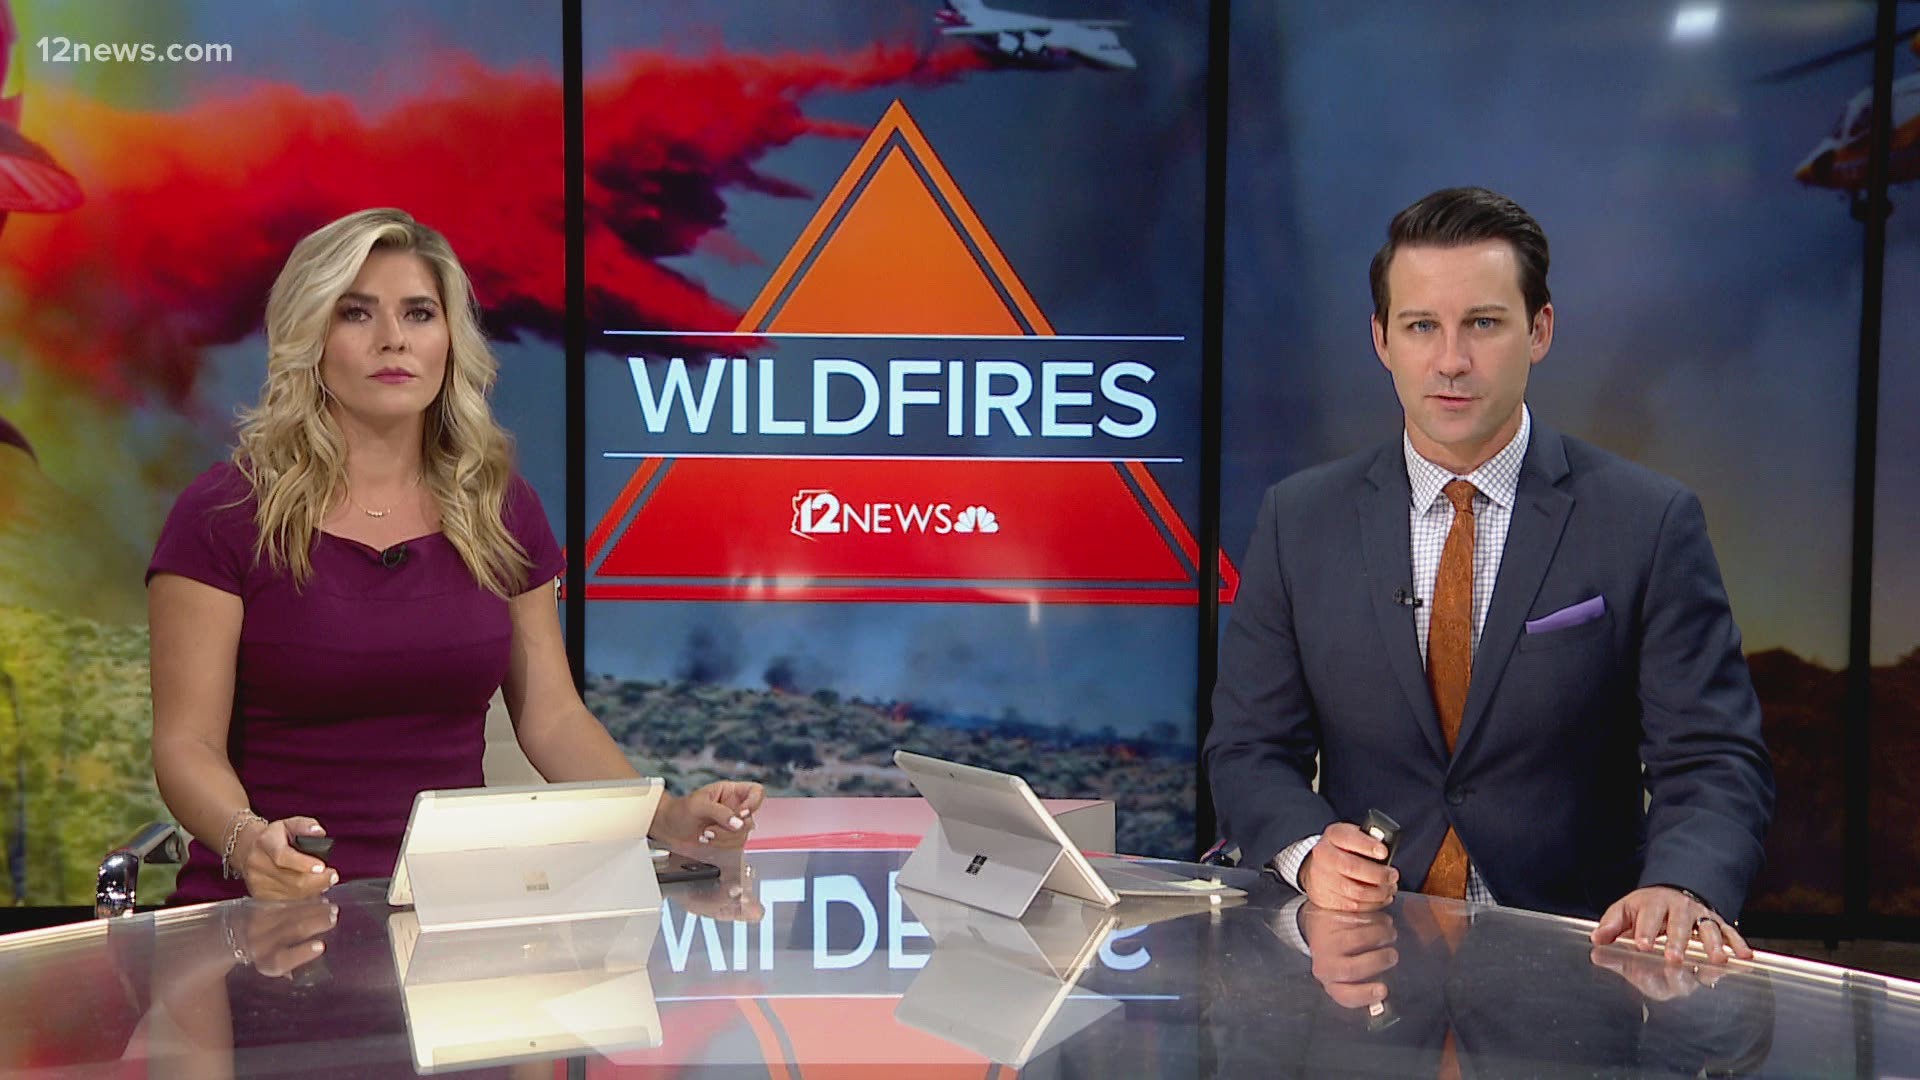 There are a few wildfires burning across Arizona. Here's an update on firefighting efforts for July 6, 2021.